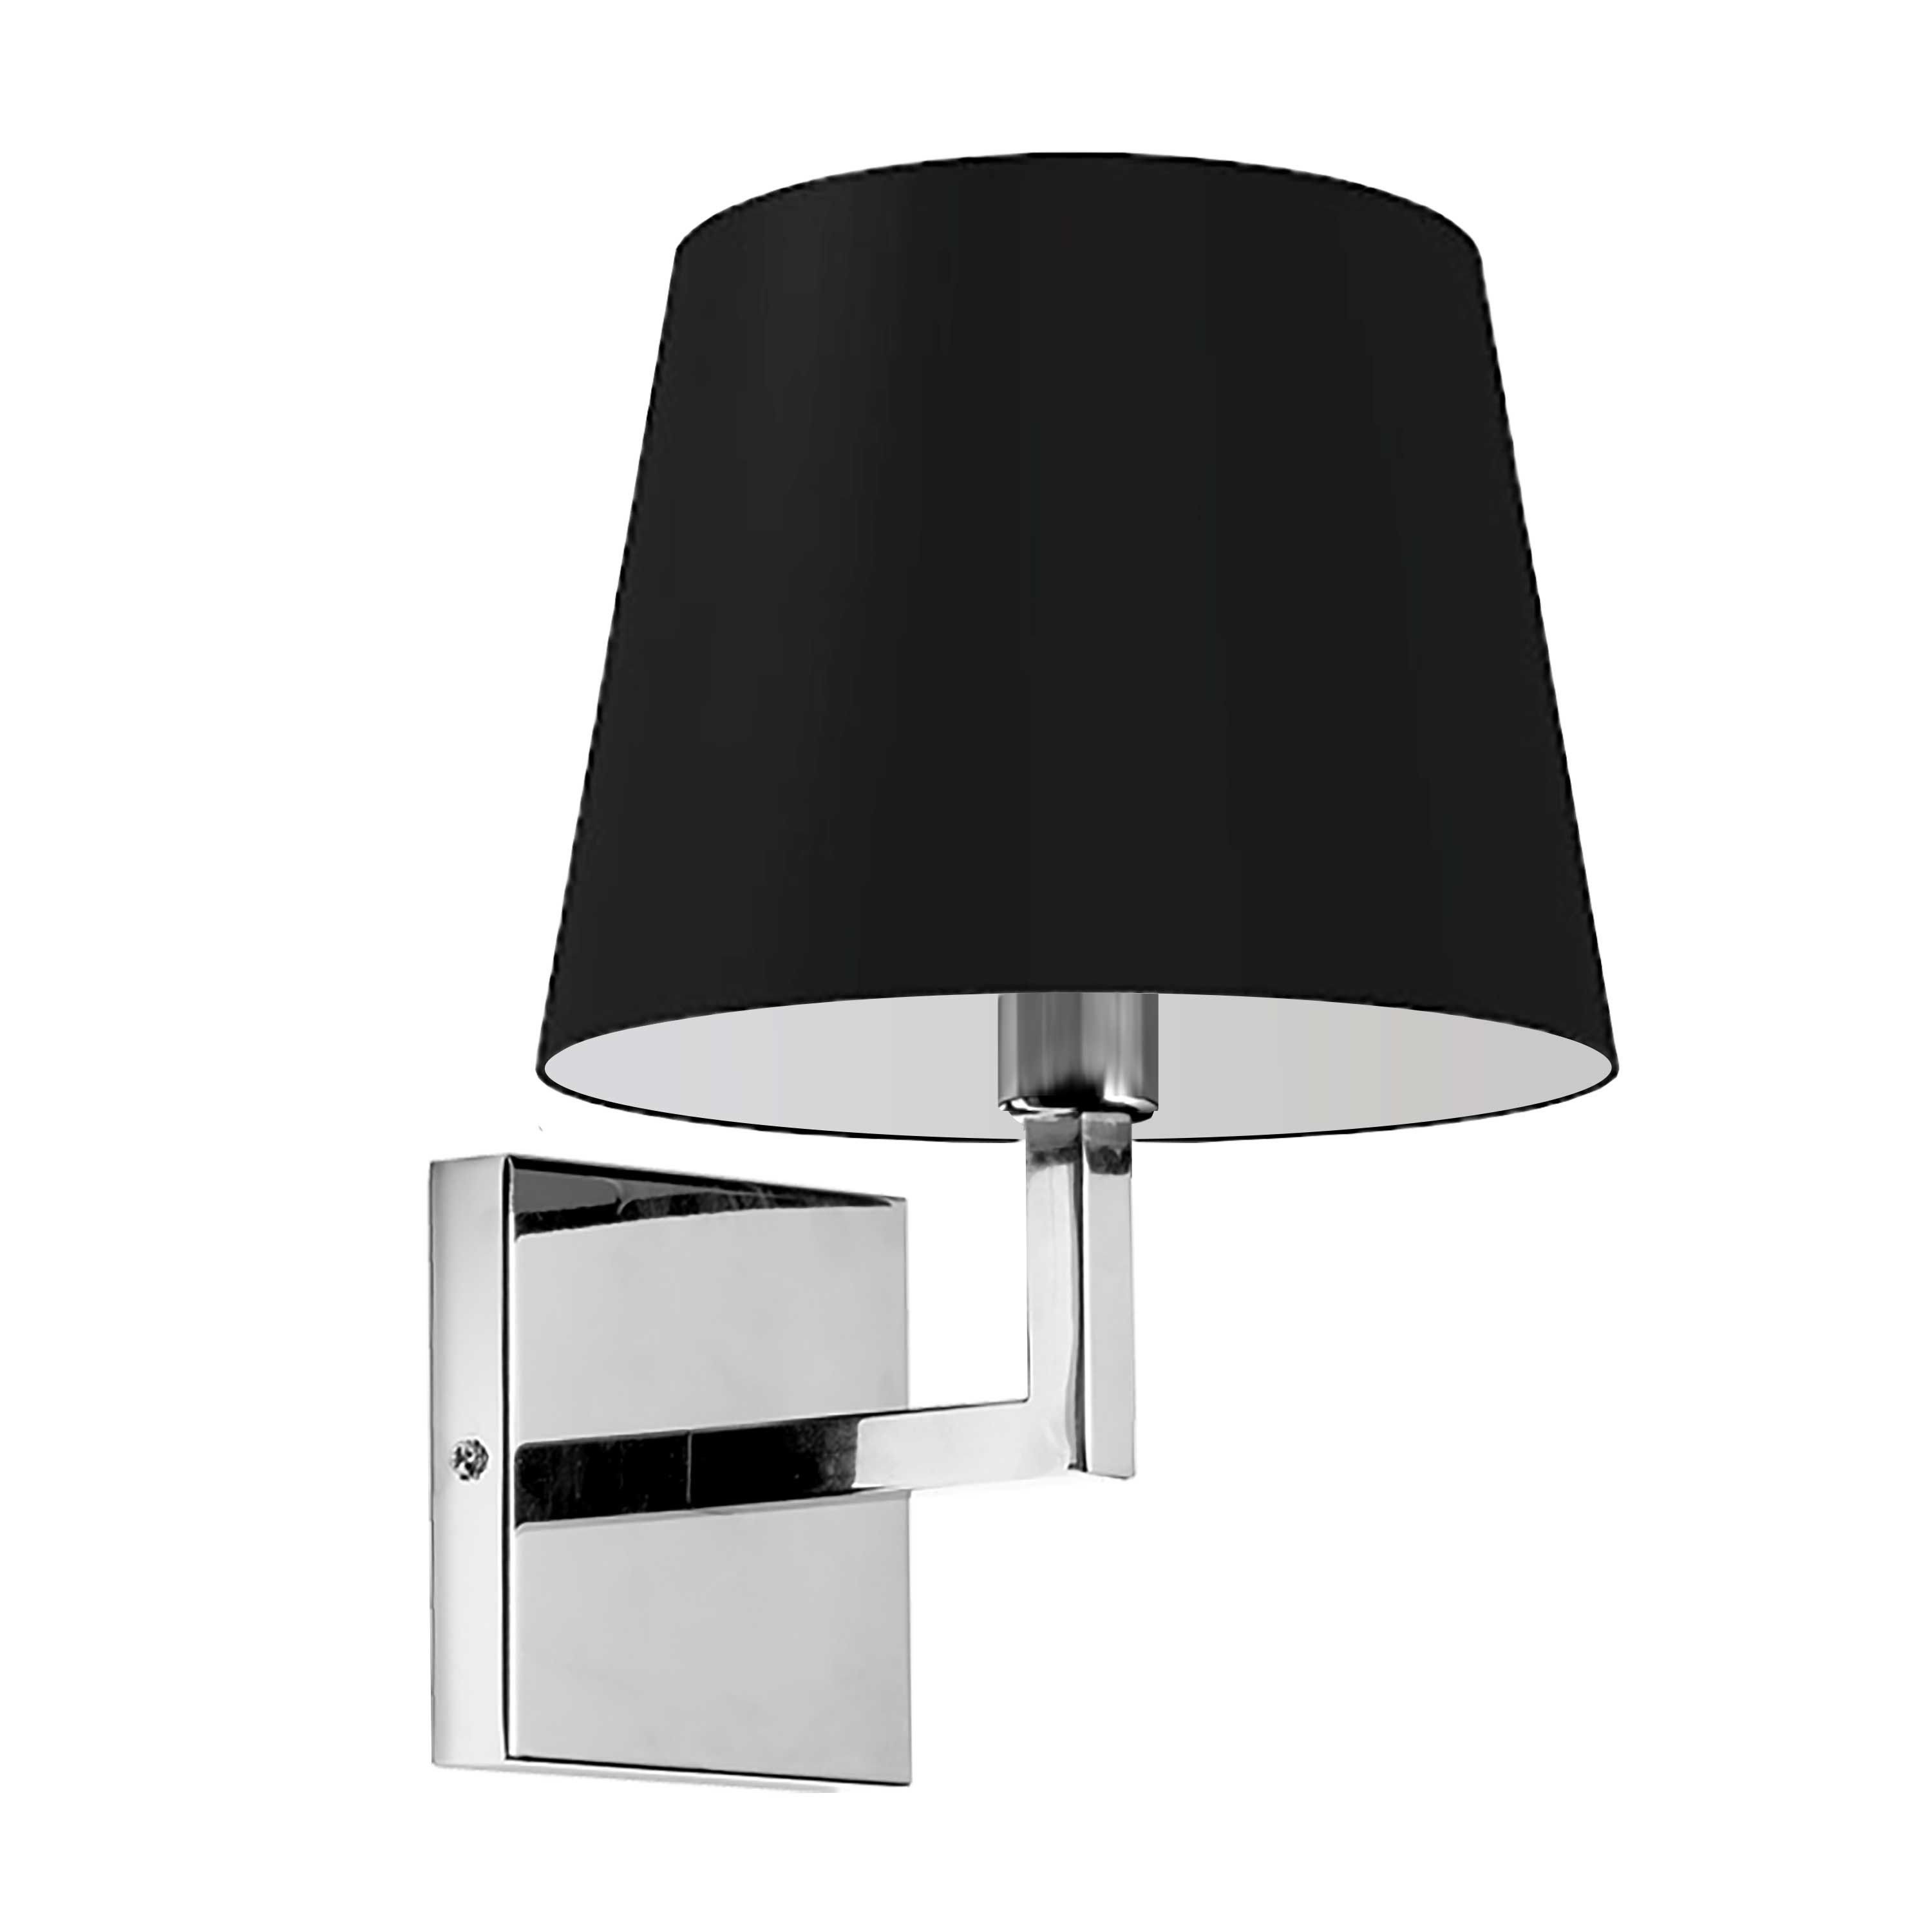 1 Light Incandescent Wall, Sconce Polished Chrome with Black Shade